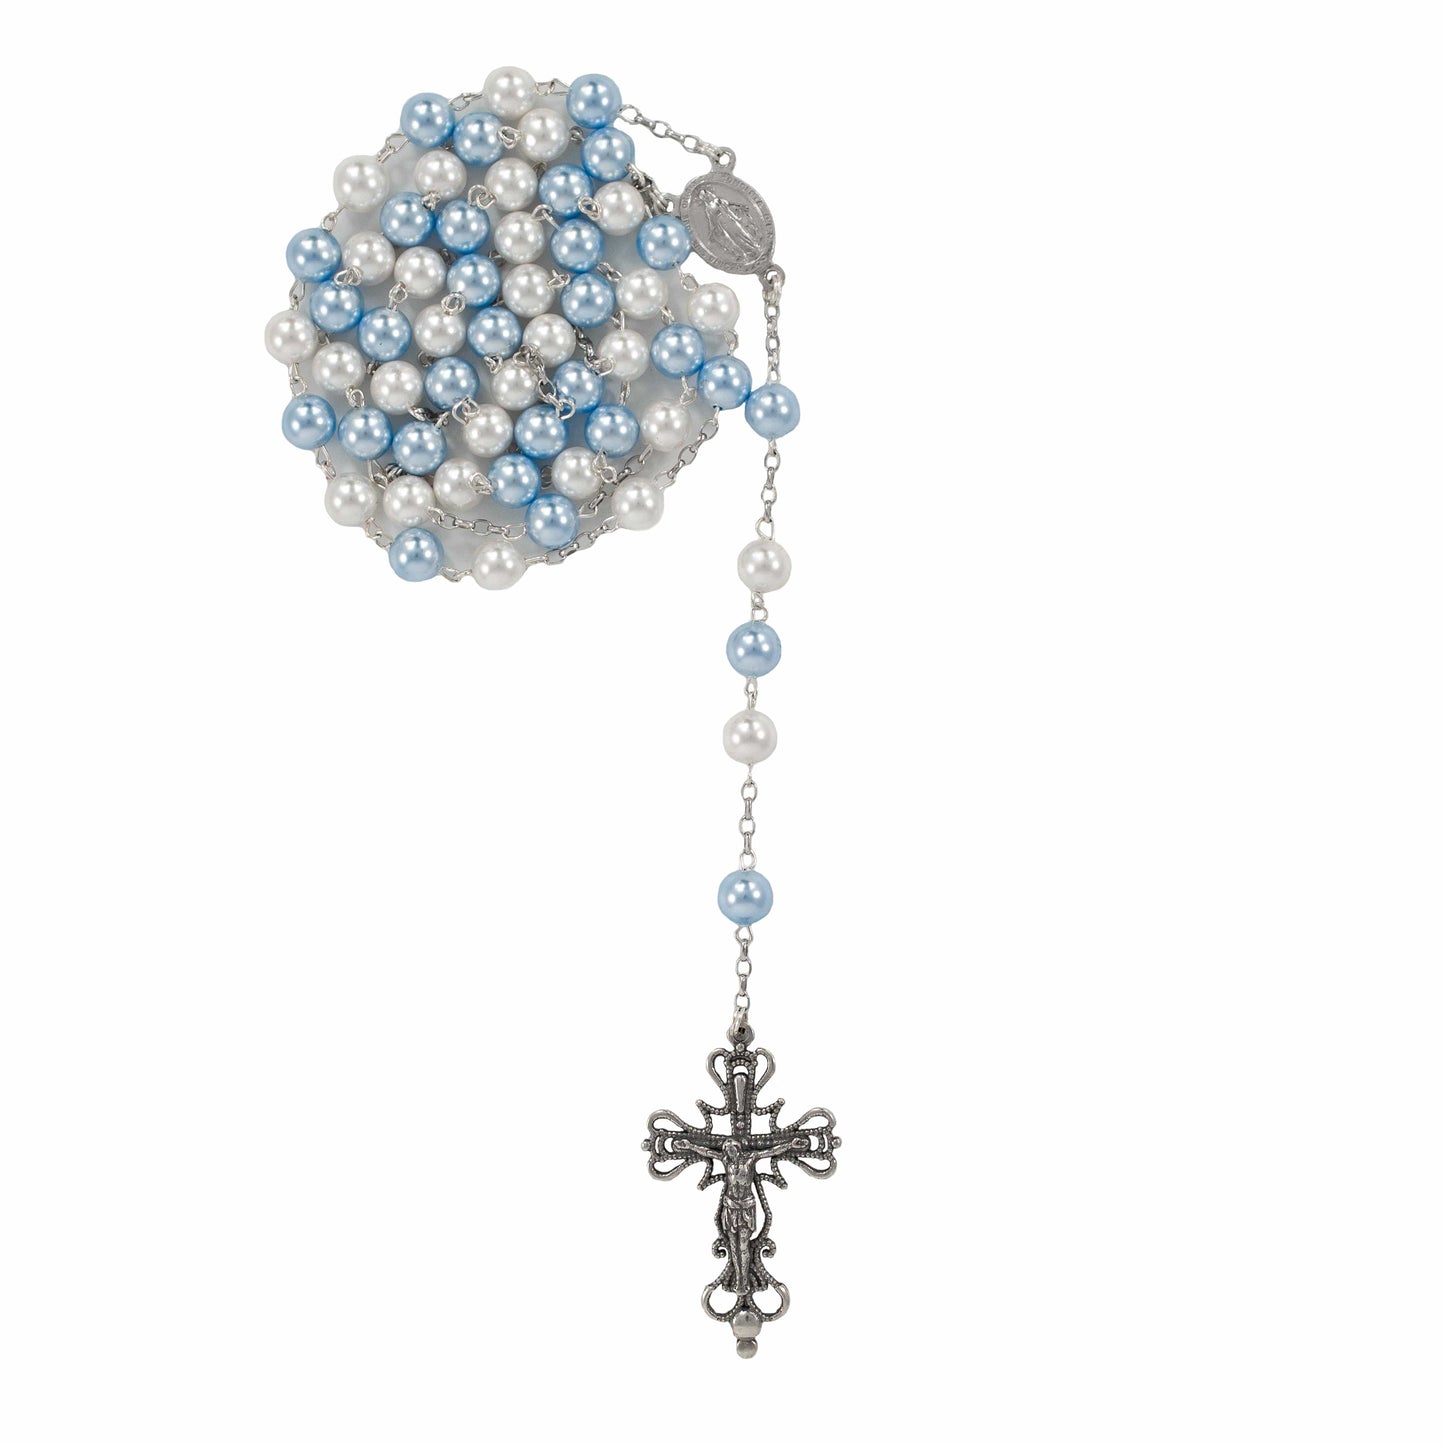 MONDO CATTOLICO Prayer Beads Sterling Silver Rosary Swarovski Crystal Pearls White and Light Blue Beads